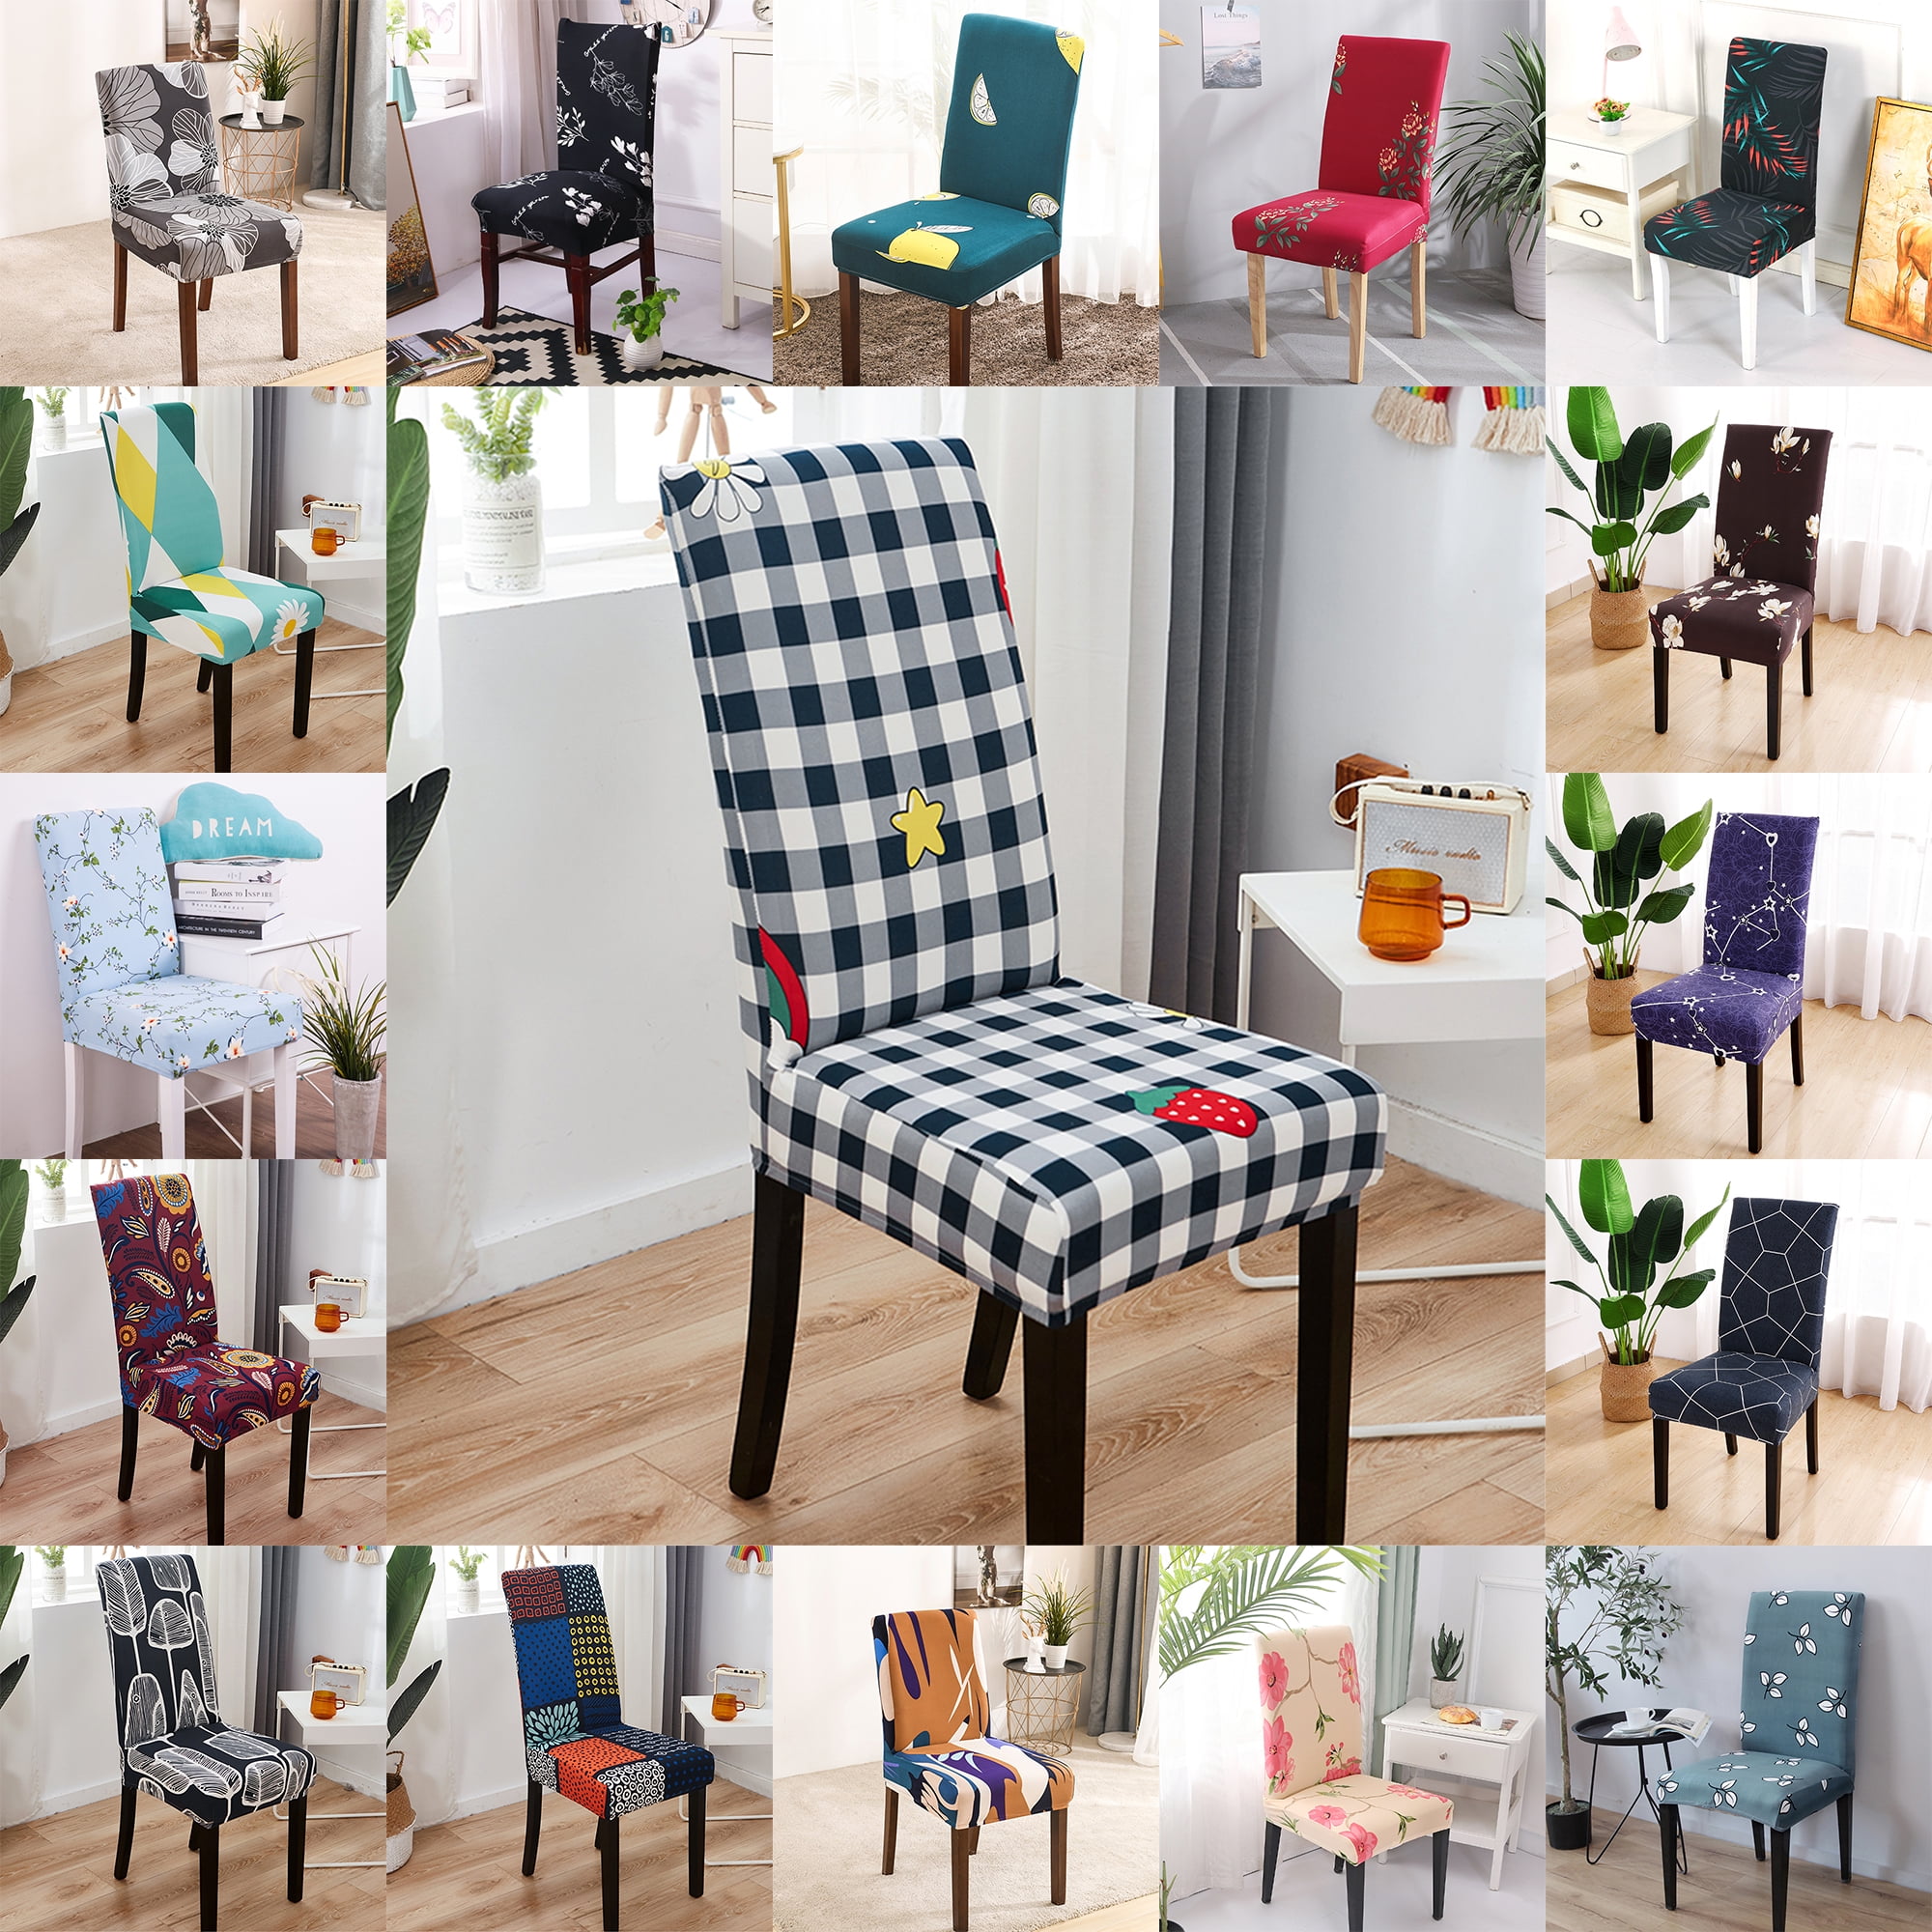 Without Chair 2 Pcs Removable Spandex Stretch Chair Protective Covers Washable Banquet Party Decor Dining Room Seat Cover 